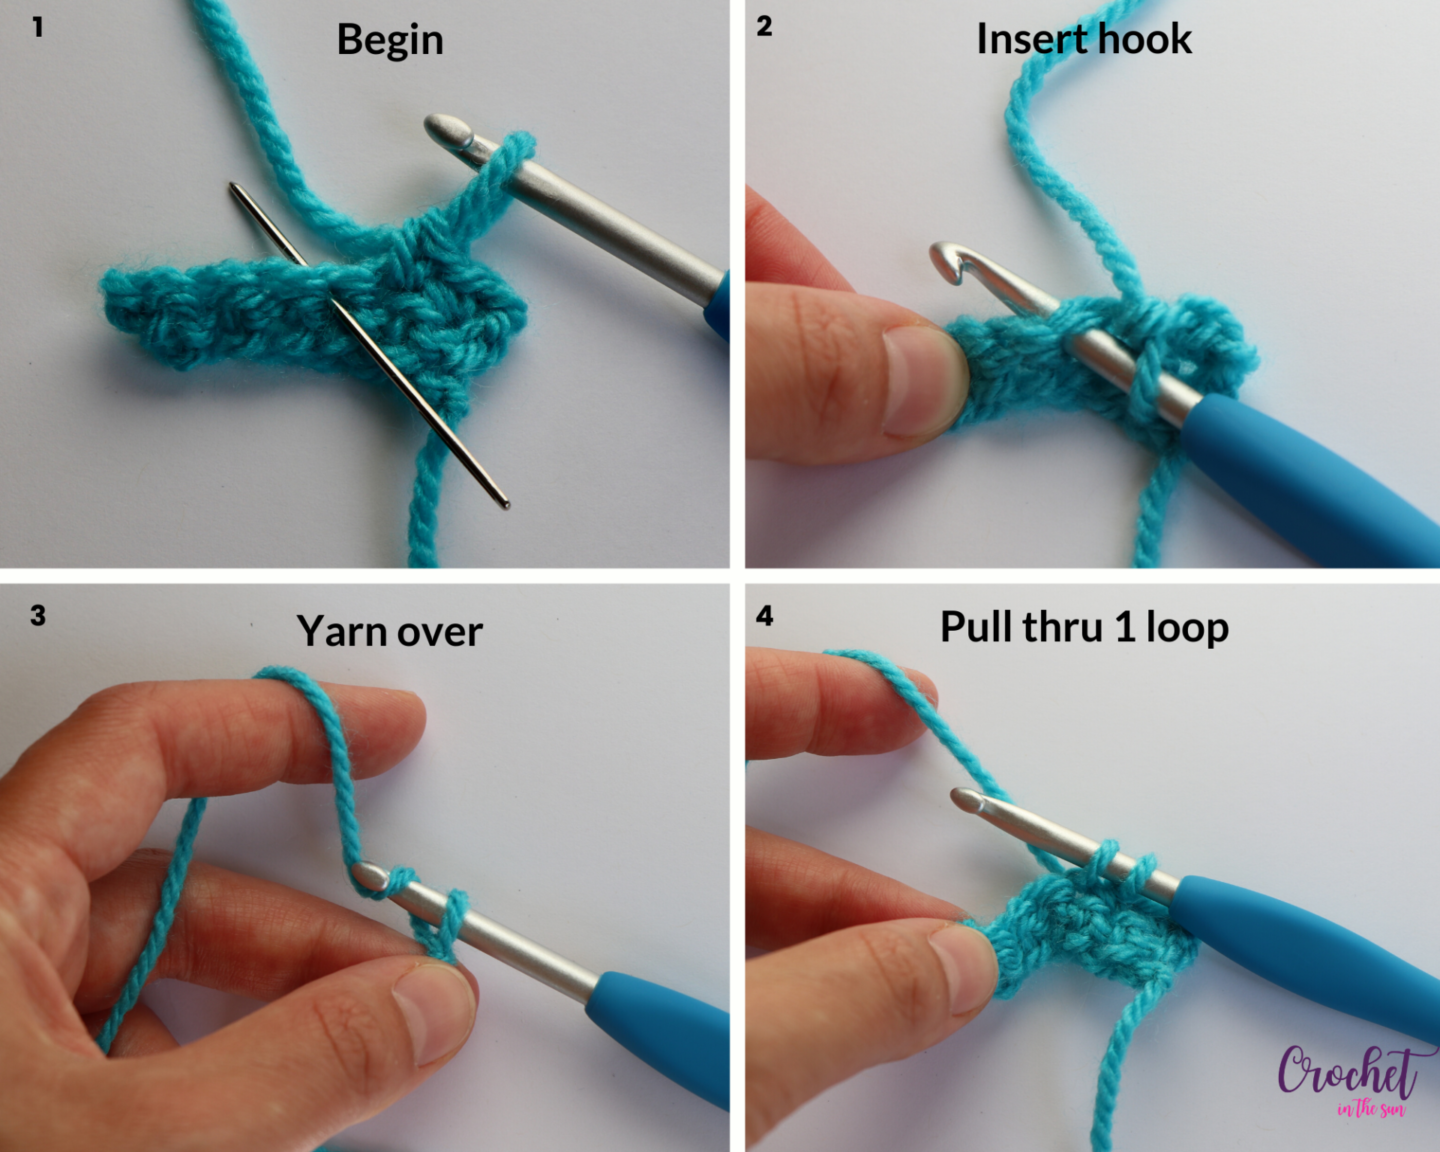 Crochet For Beginners: The Comprehensive Crochet Guide for Novices,  Including Step-by-Step, Easy-to-Follow Instructions, Tips & Tricks and a  Wide